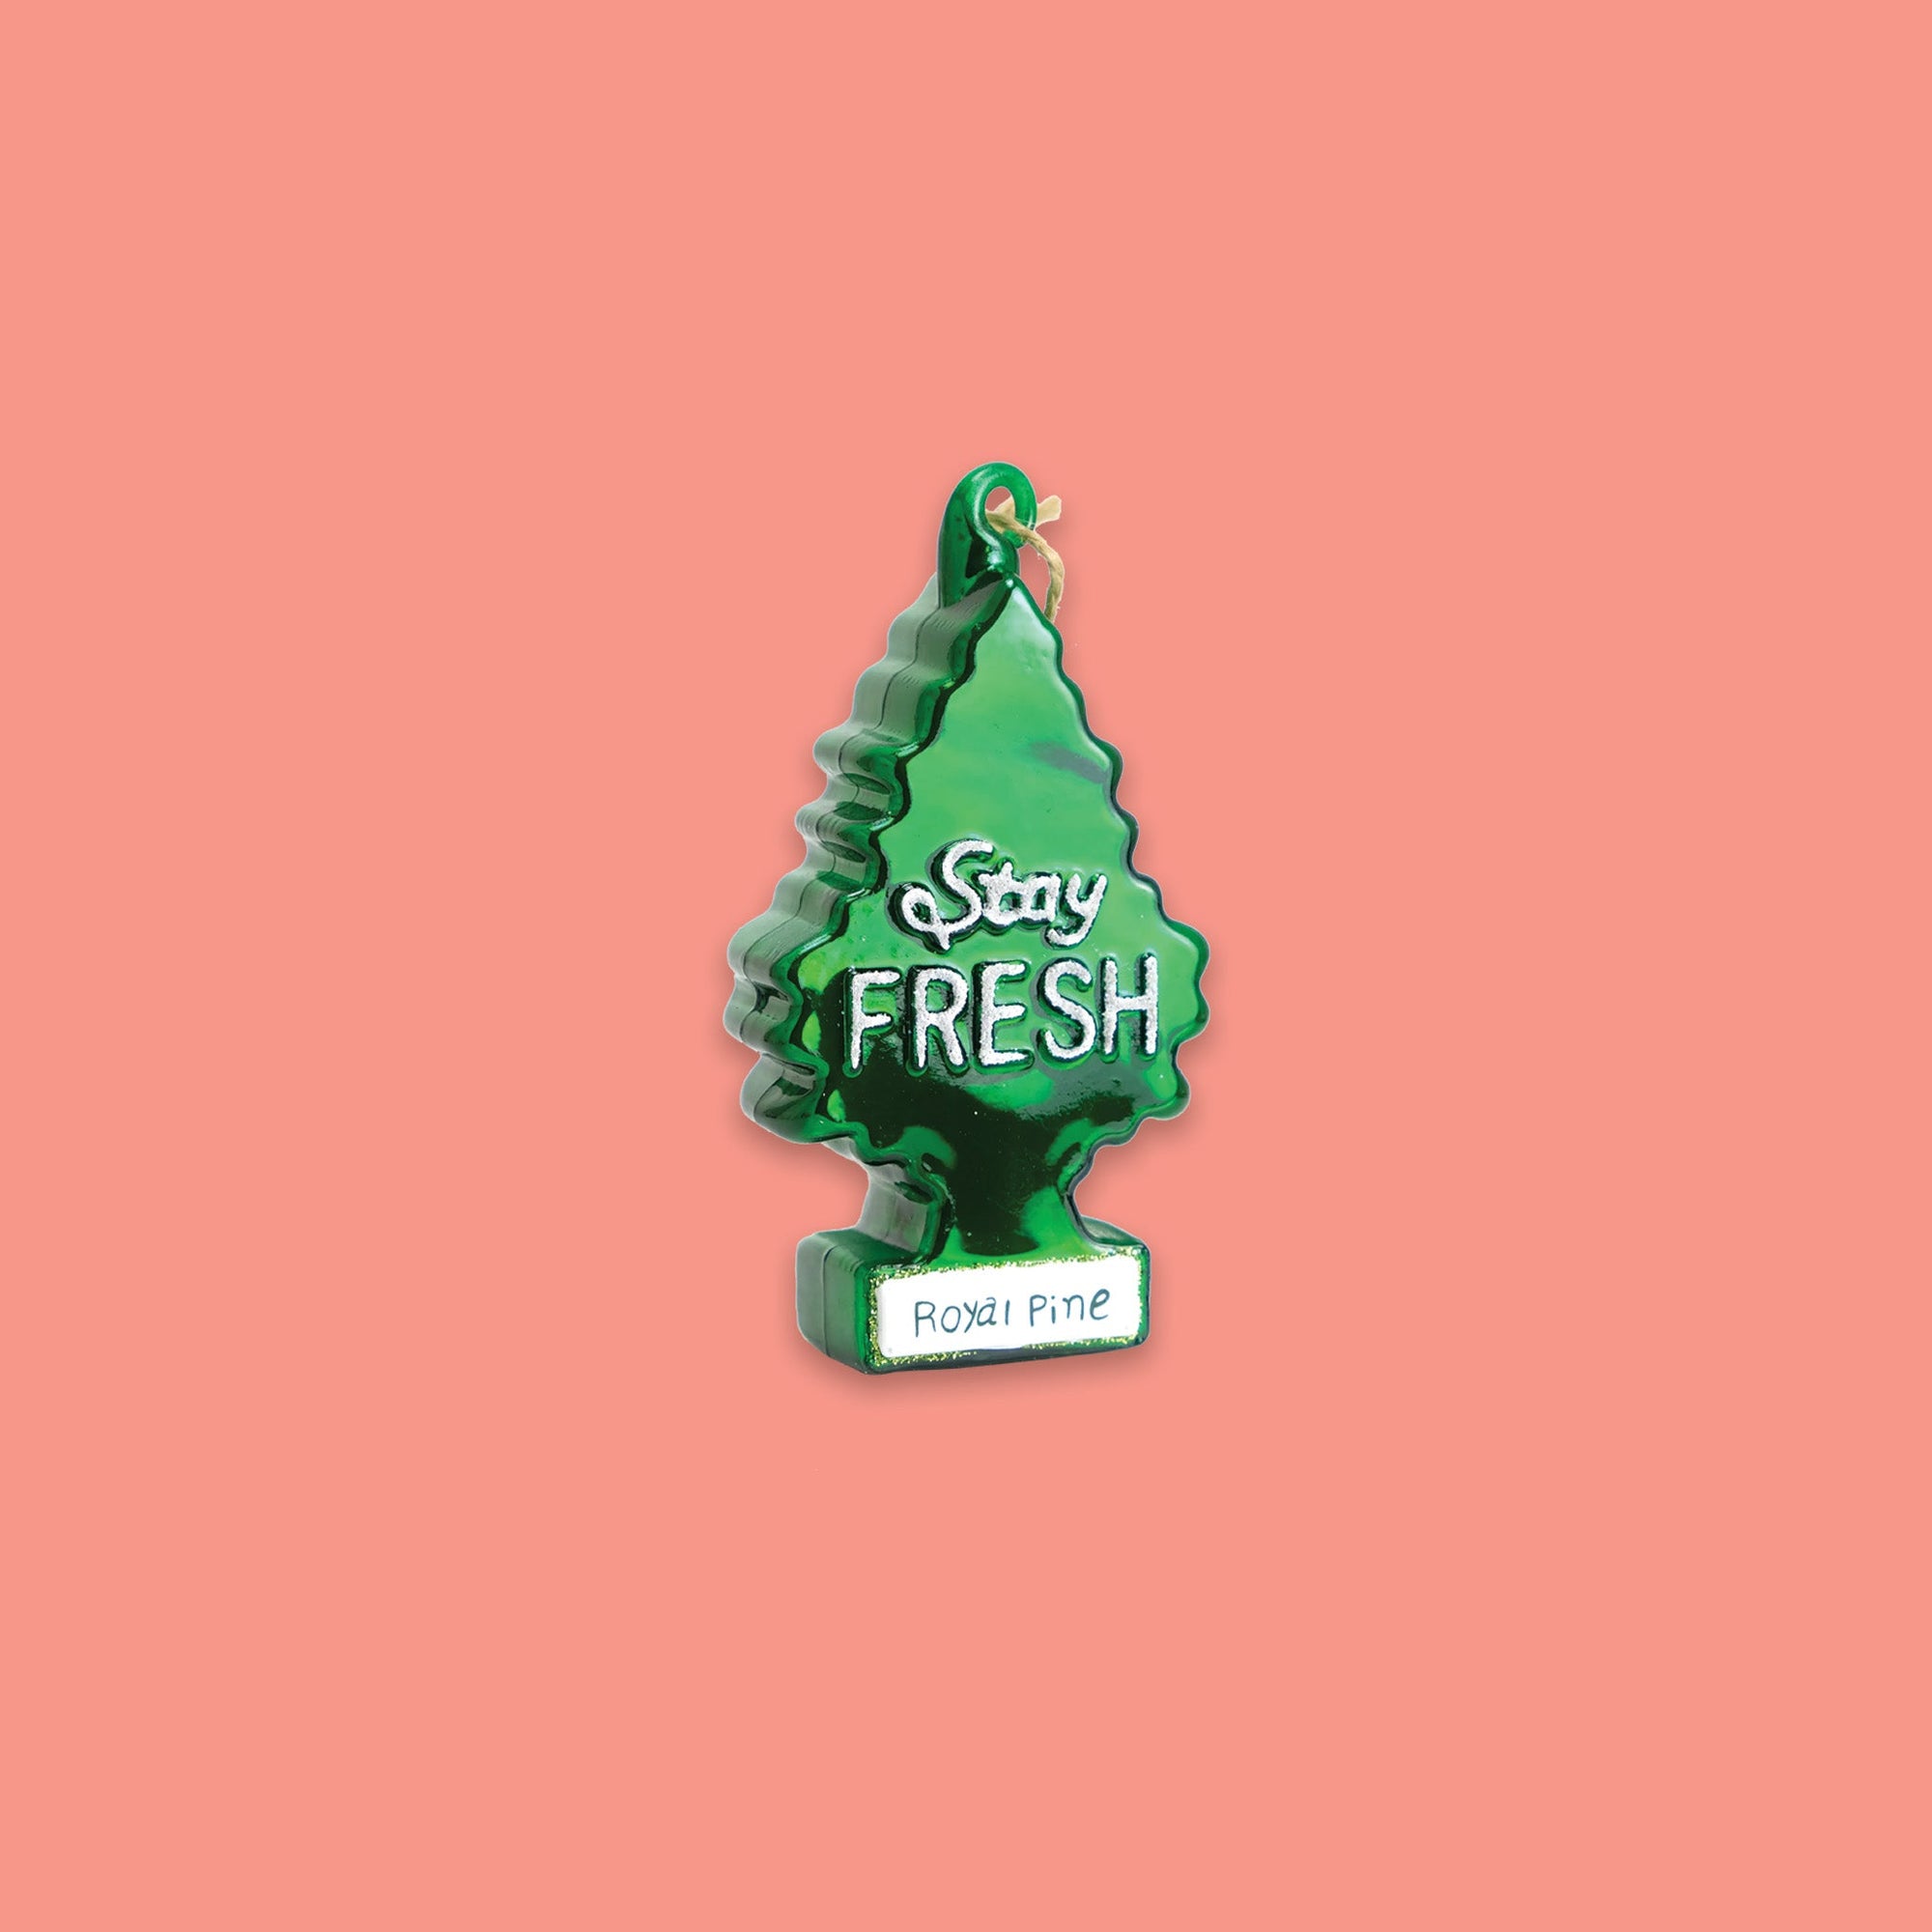 On a coral pink background sits an ornament. This glass ornament is of a green christmas tree and in white glitter it says "Stay FRESH" in hand lettering. On the bottom it says "Royal Pine" in green on a white background.